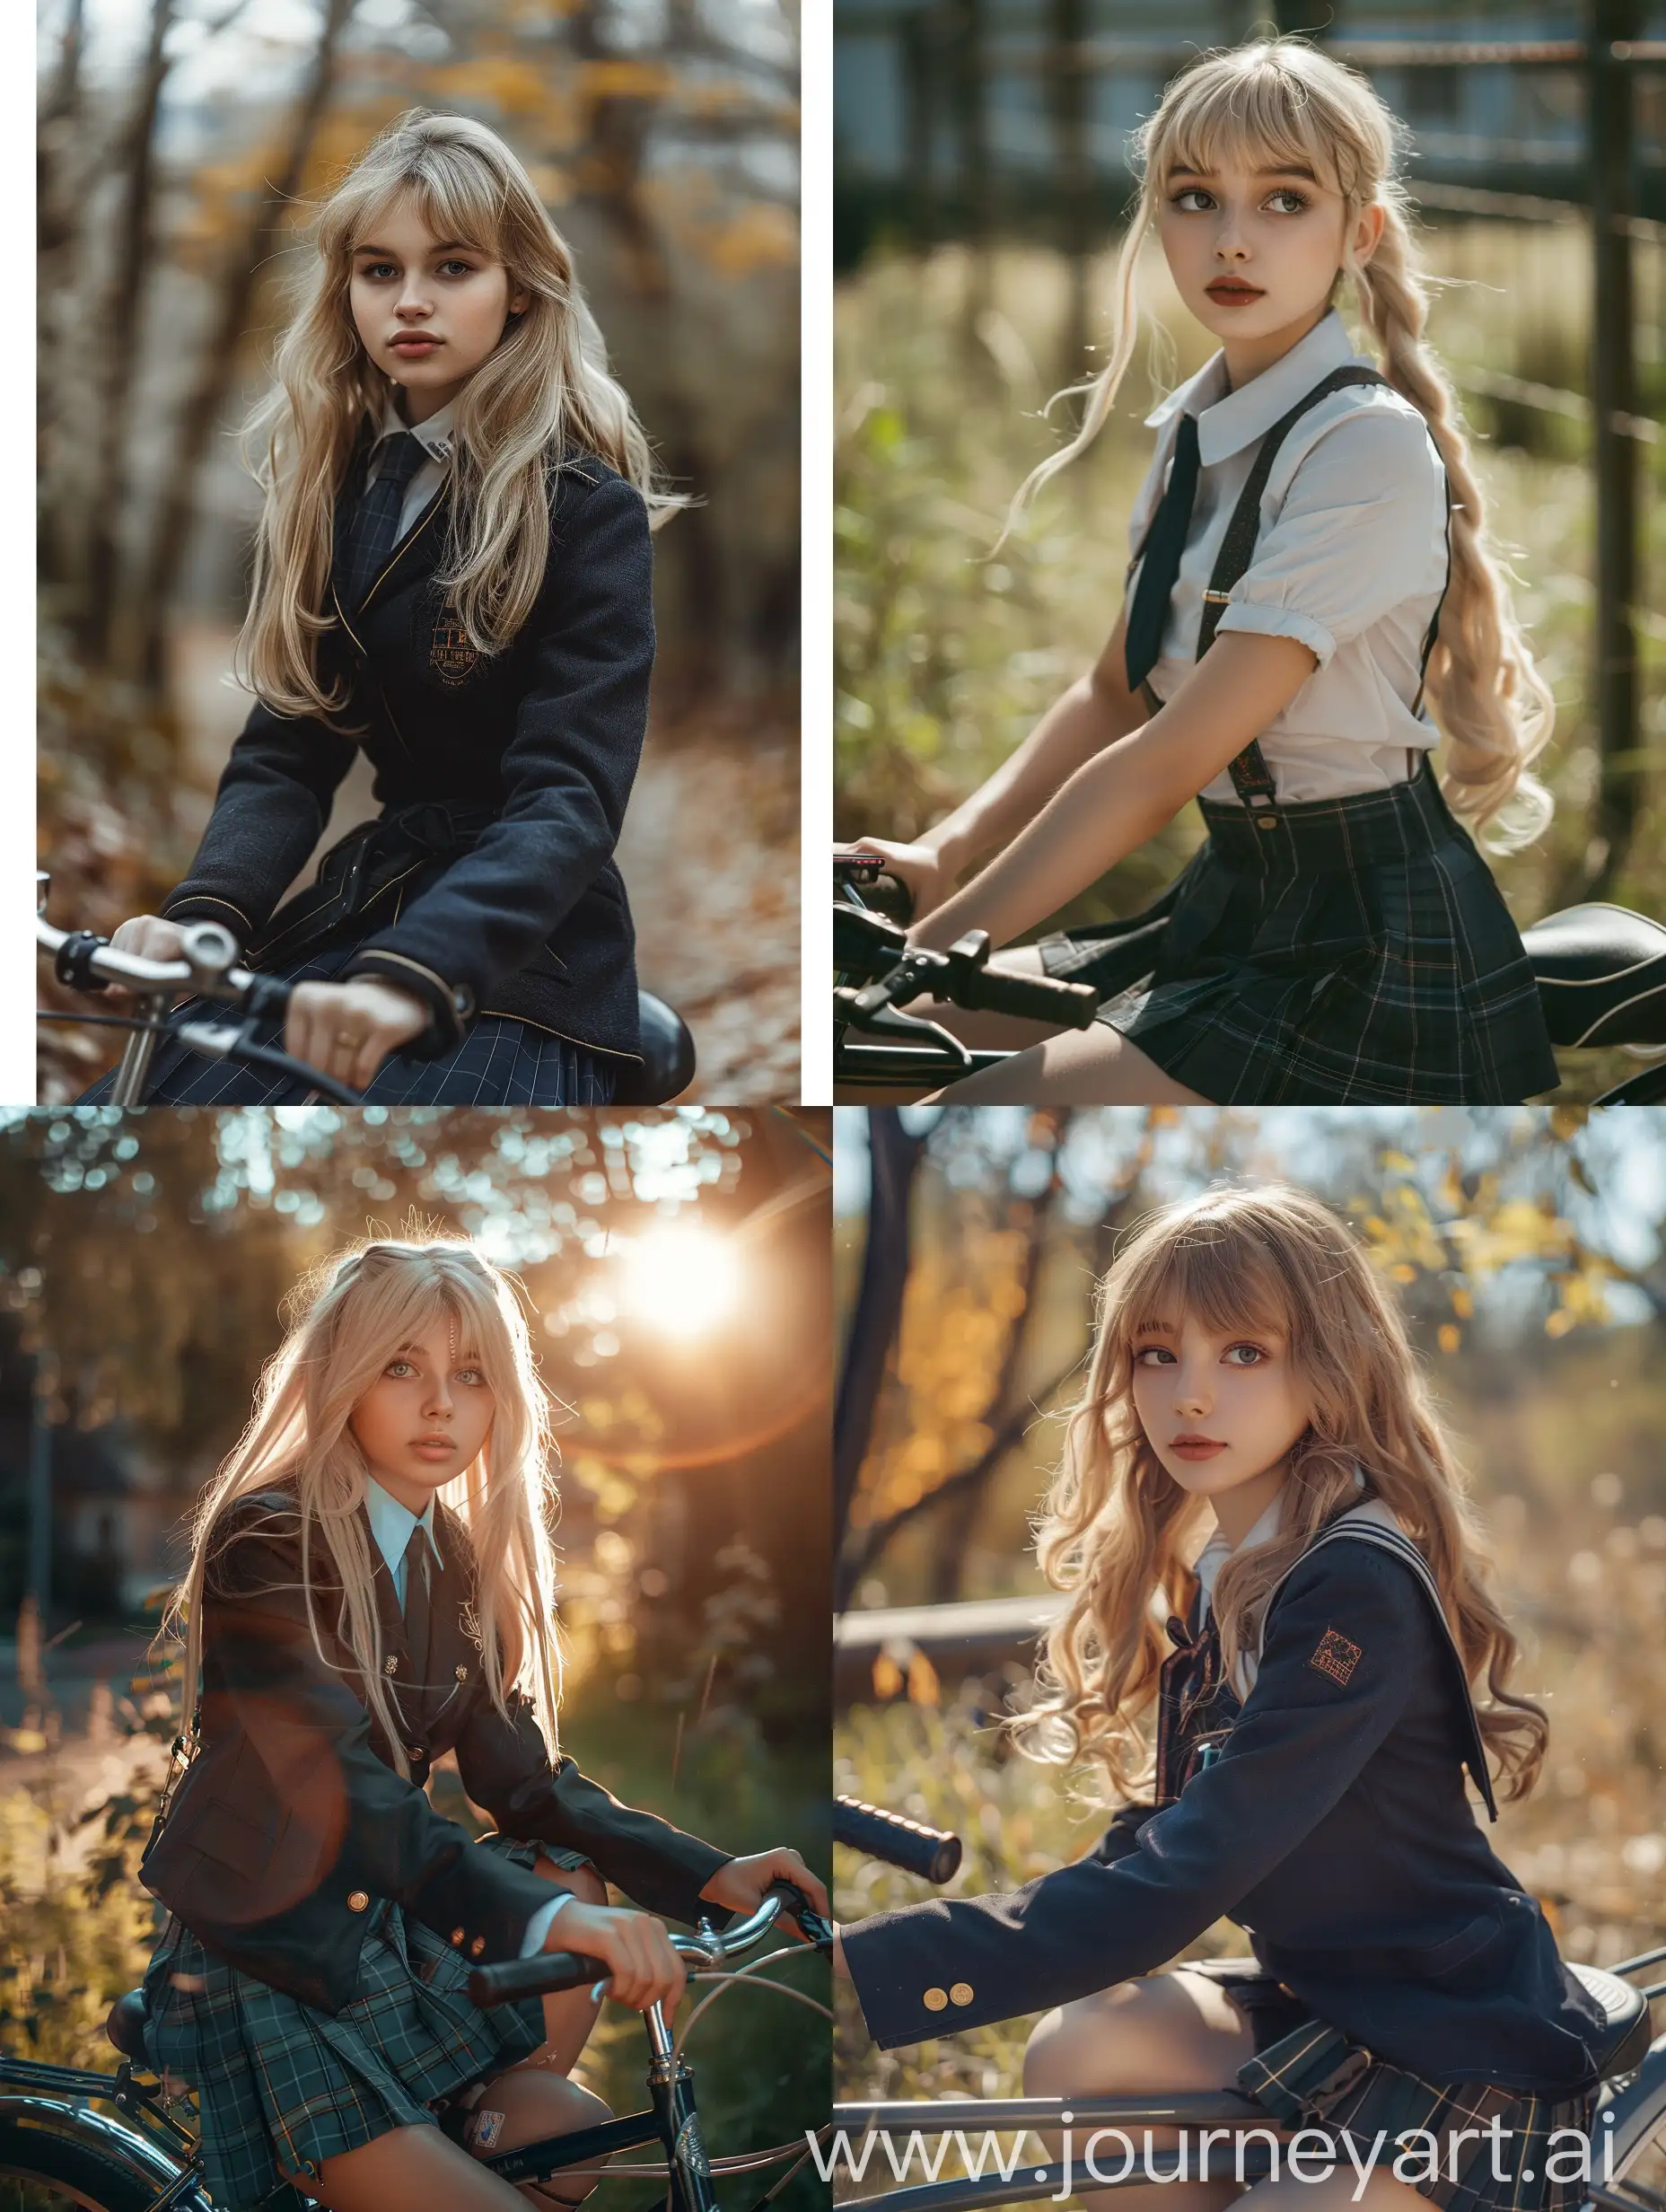 Blonde-Schoolgirl-Riding-Bicycle-in-Animalier-Style-with-RTX-on